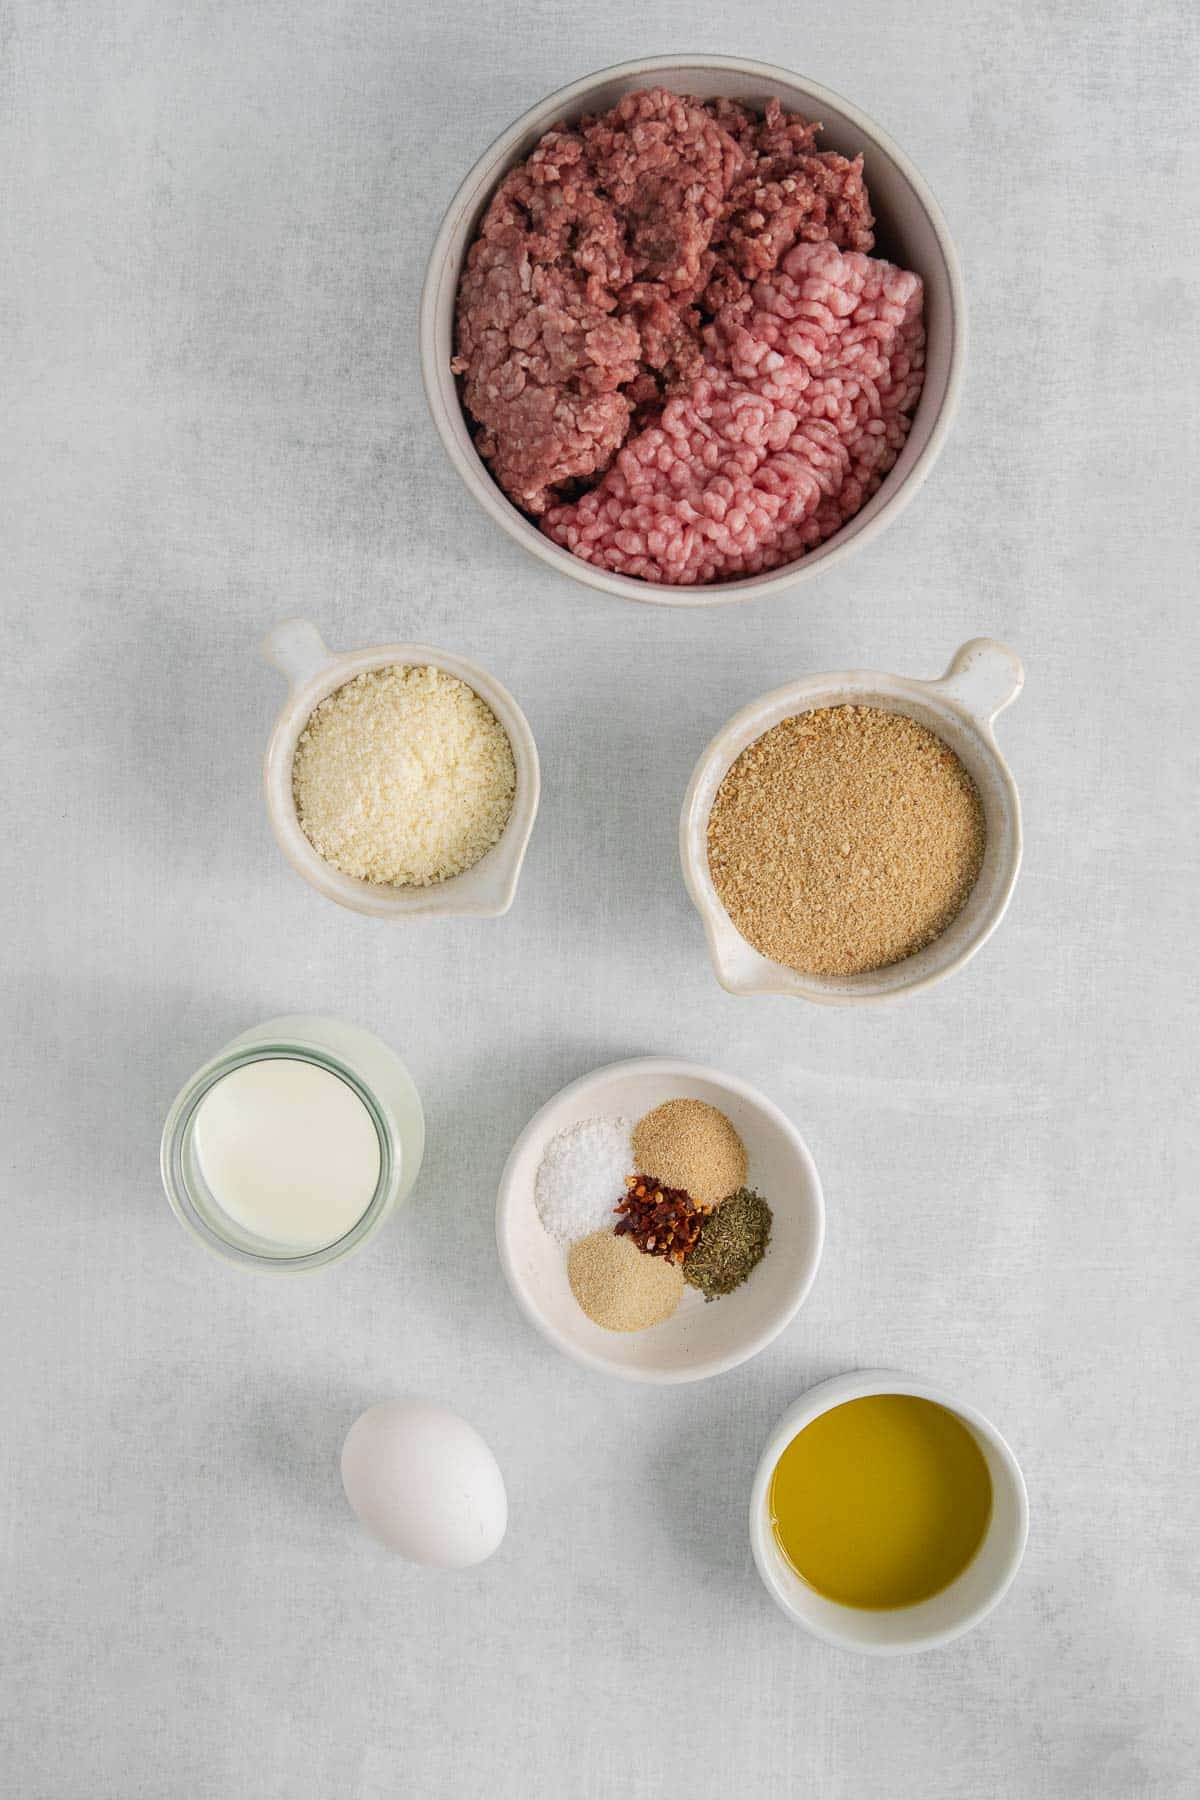 ingredients for homemade meatballs - raw meat, egg, breadcrumbs, parmesan cheese, spices and oil.